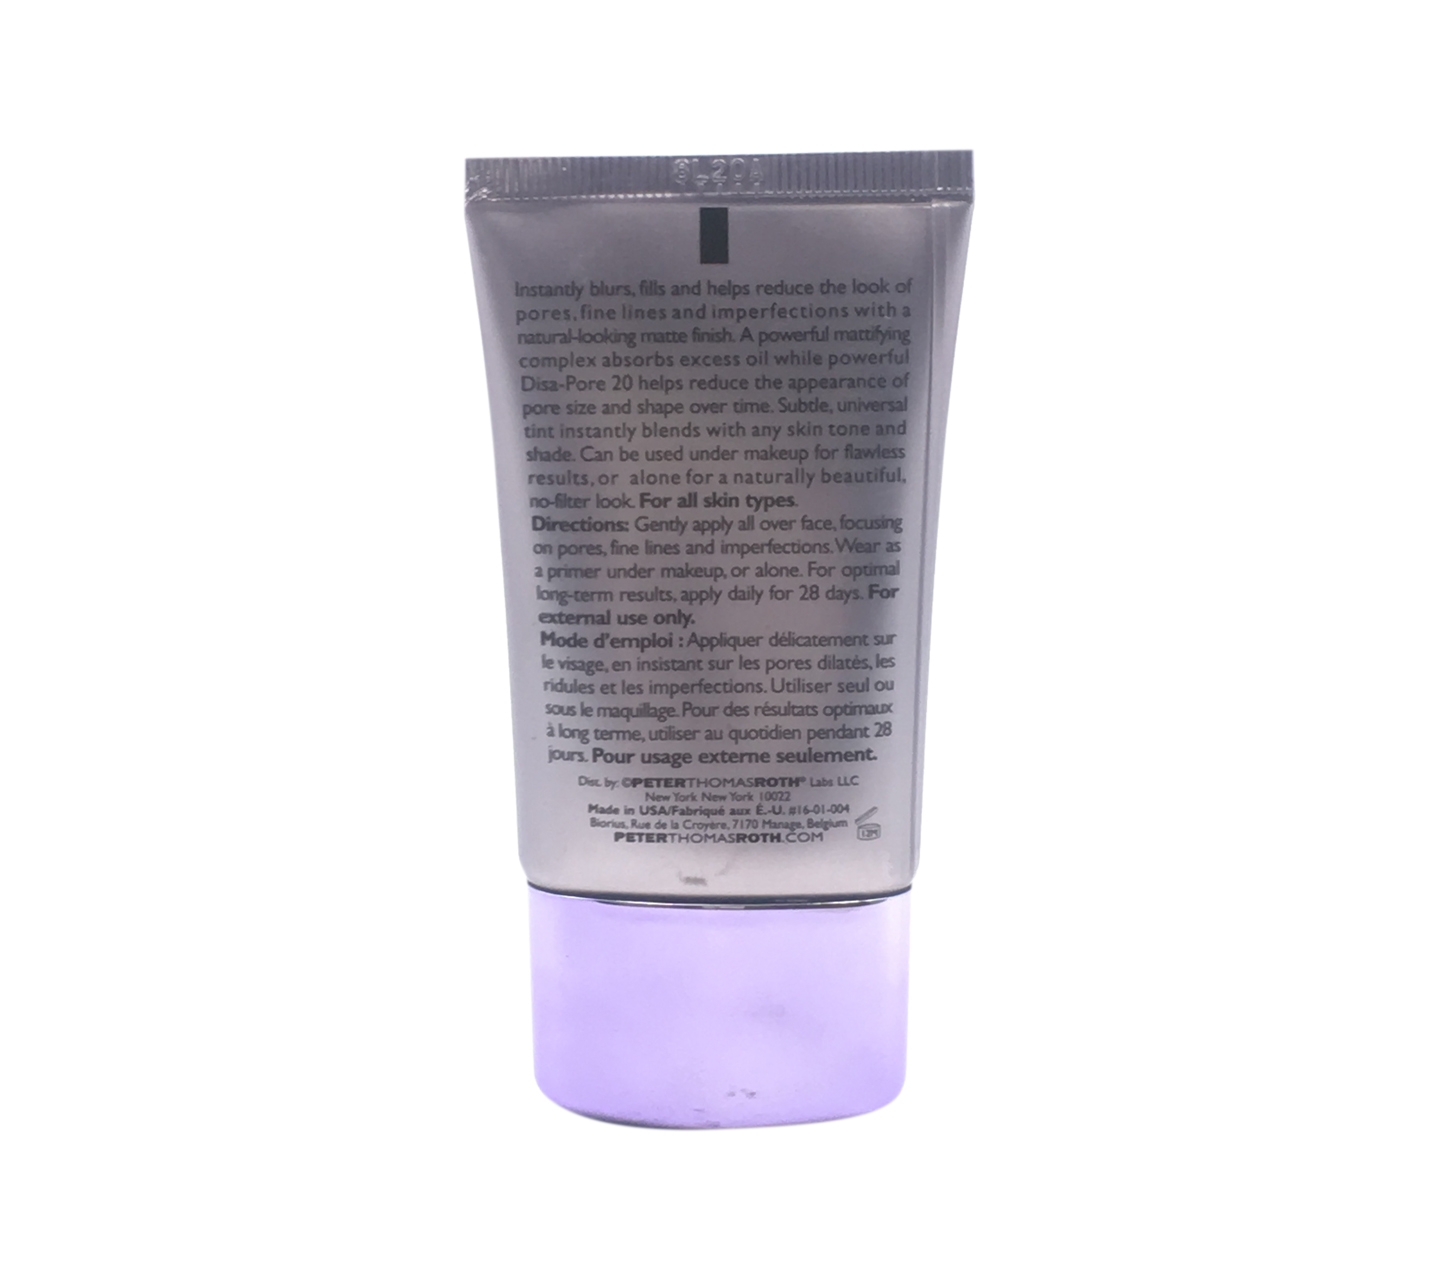 Peter Thomas Roth Skin to Die For Skin Care 